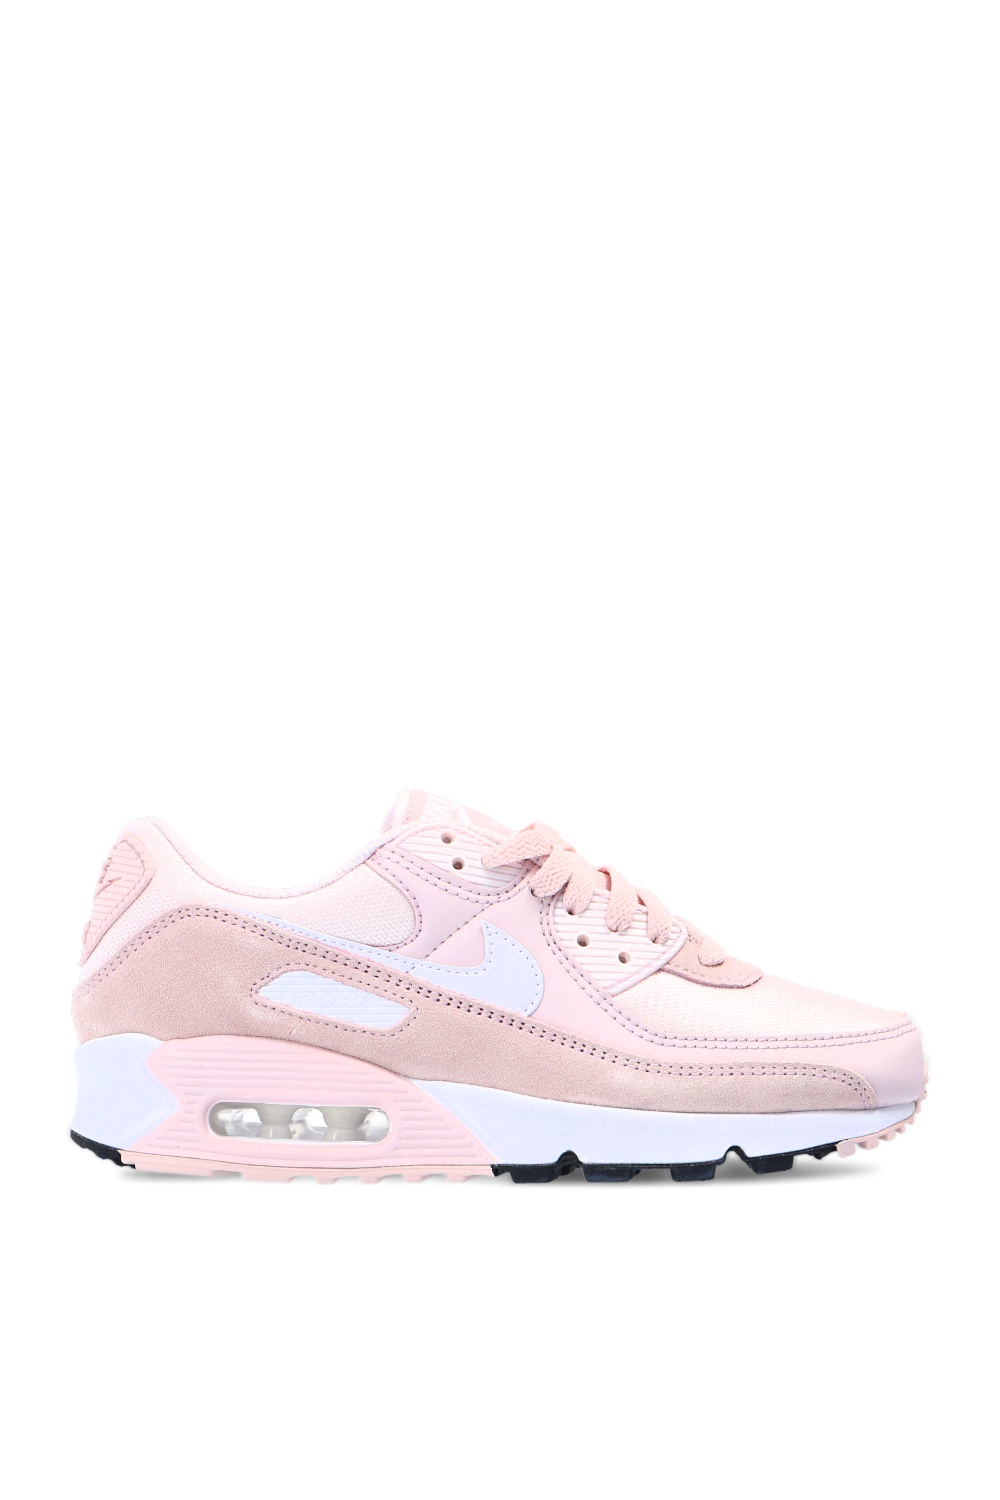 air max 90 size guide